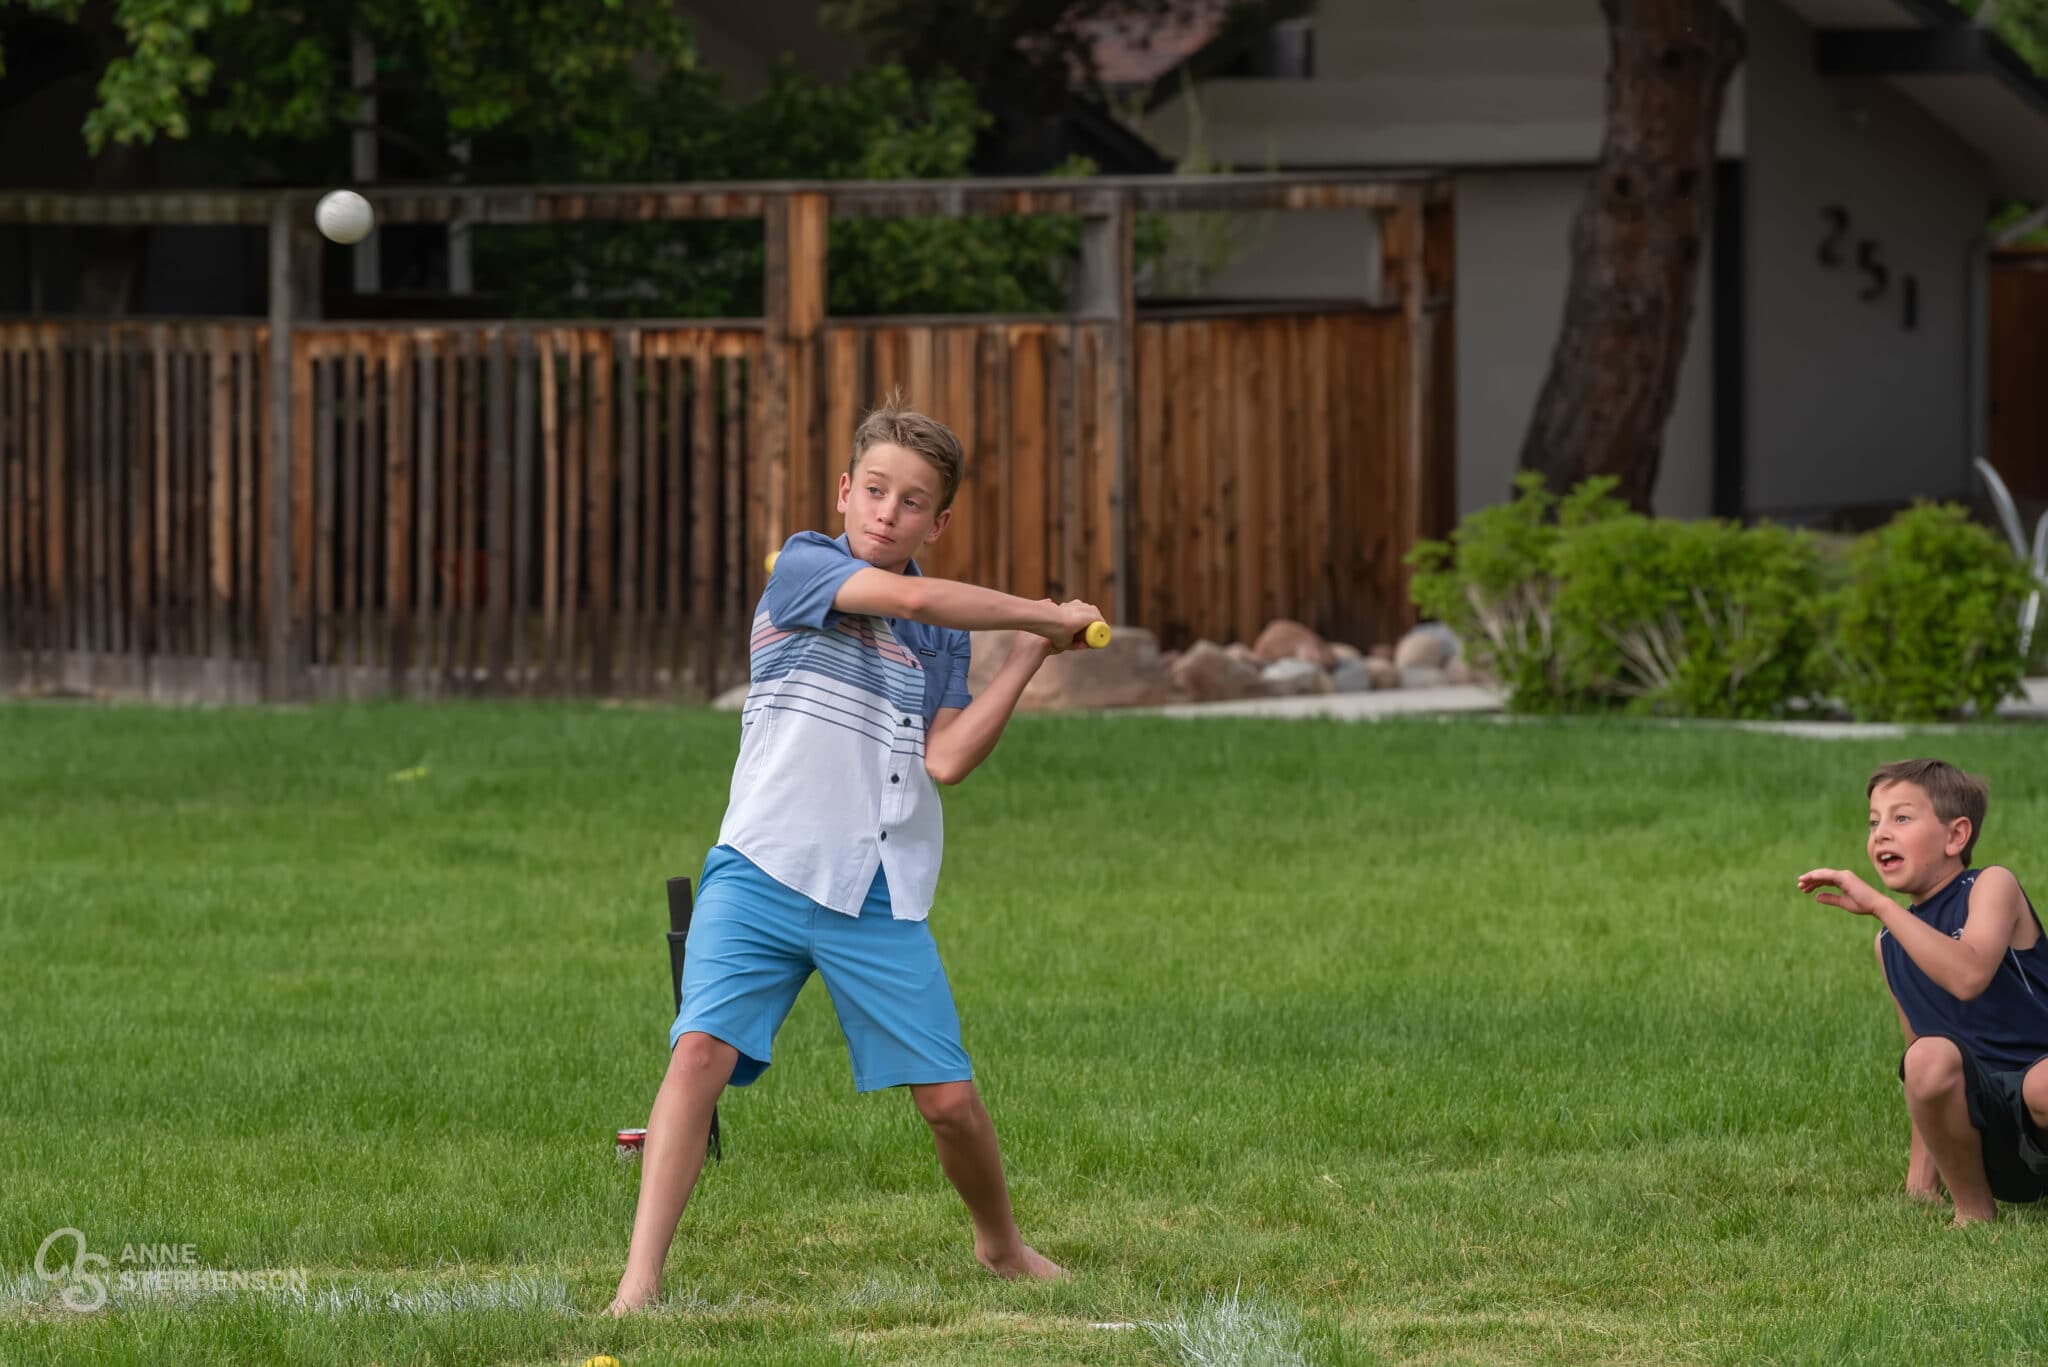 A young teen take the bat and swings during a wiffle ball game.